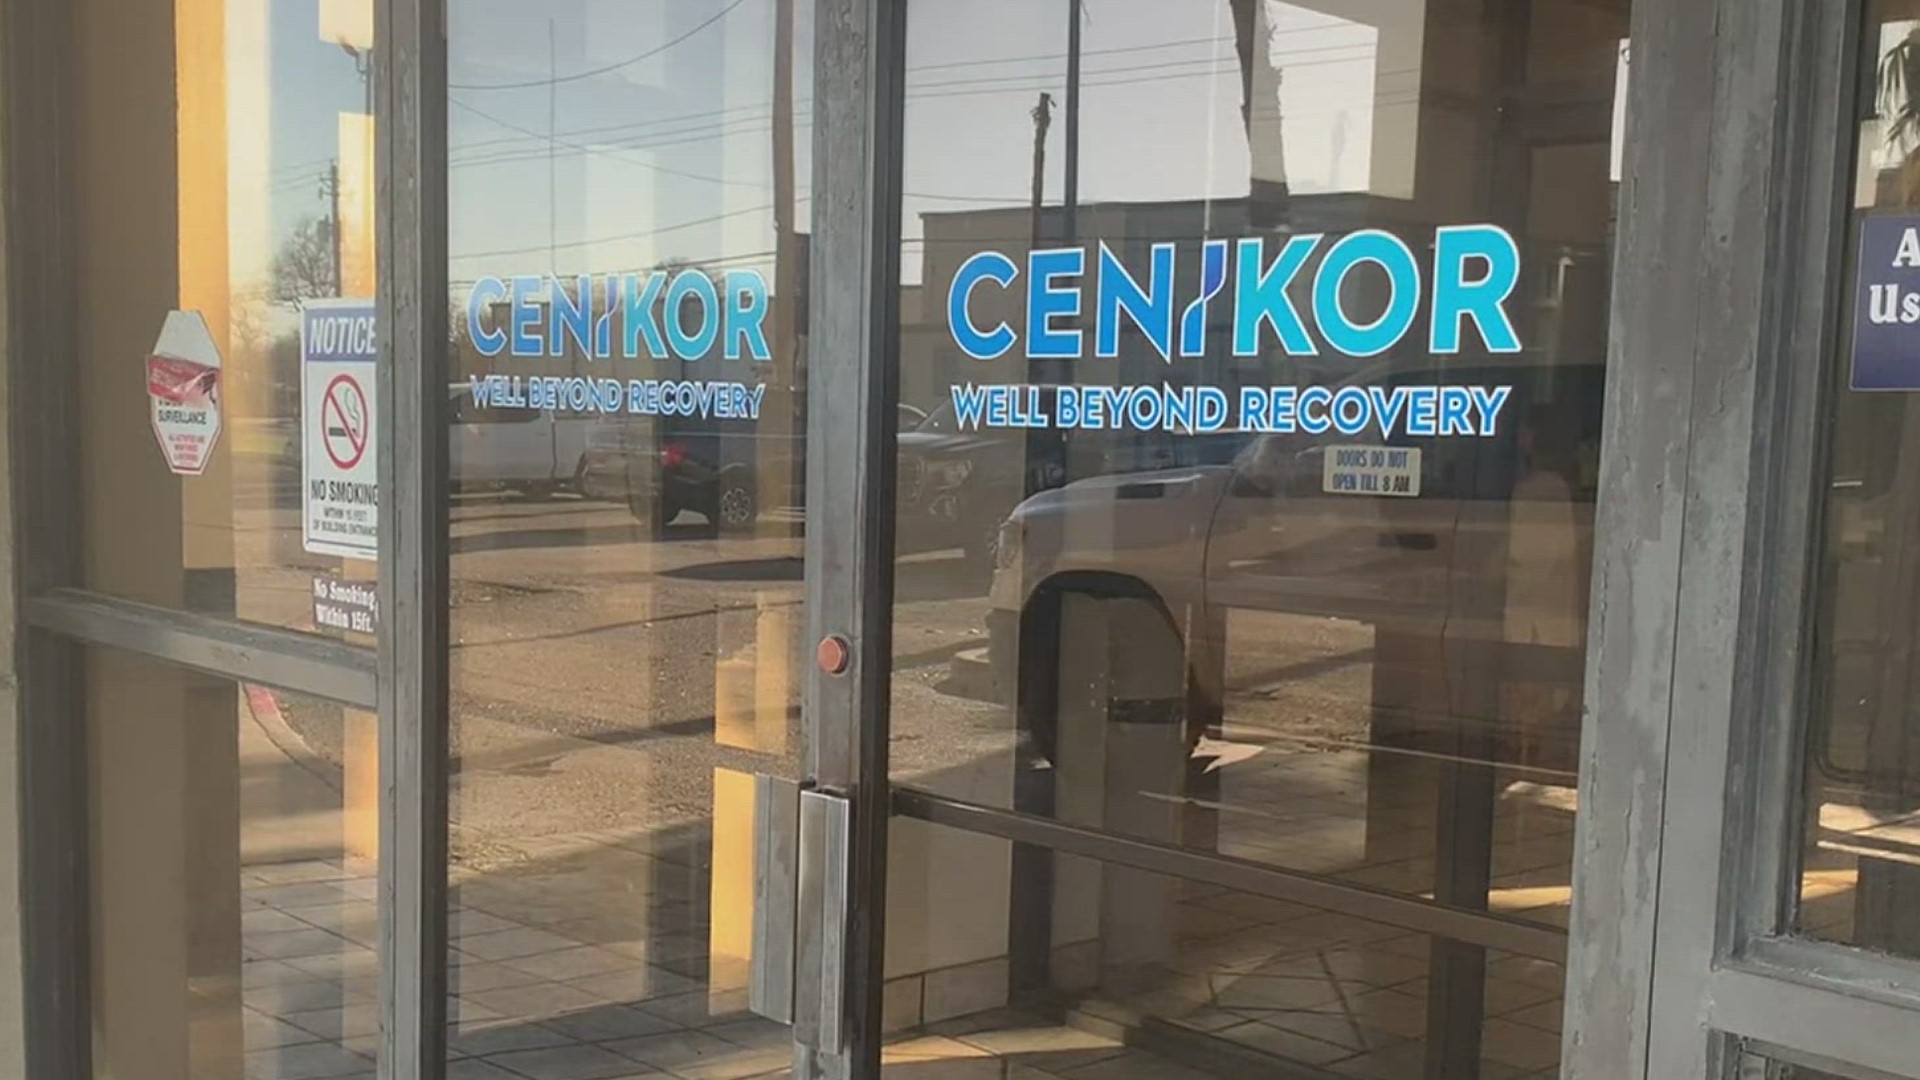 Corpus Christi City Council approved Cenikor's zoning request.